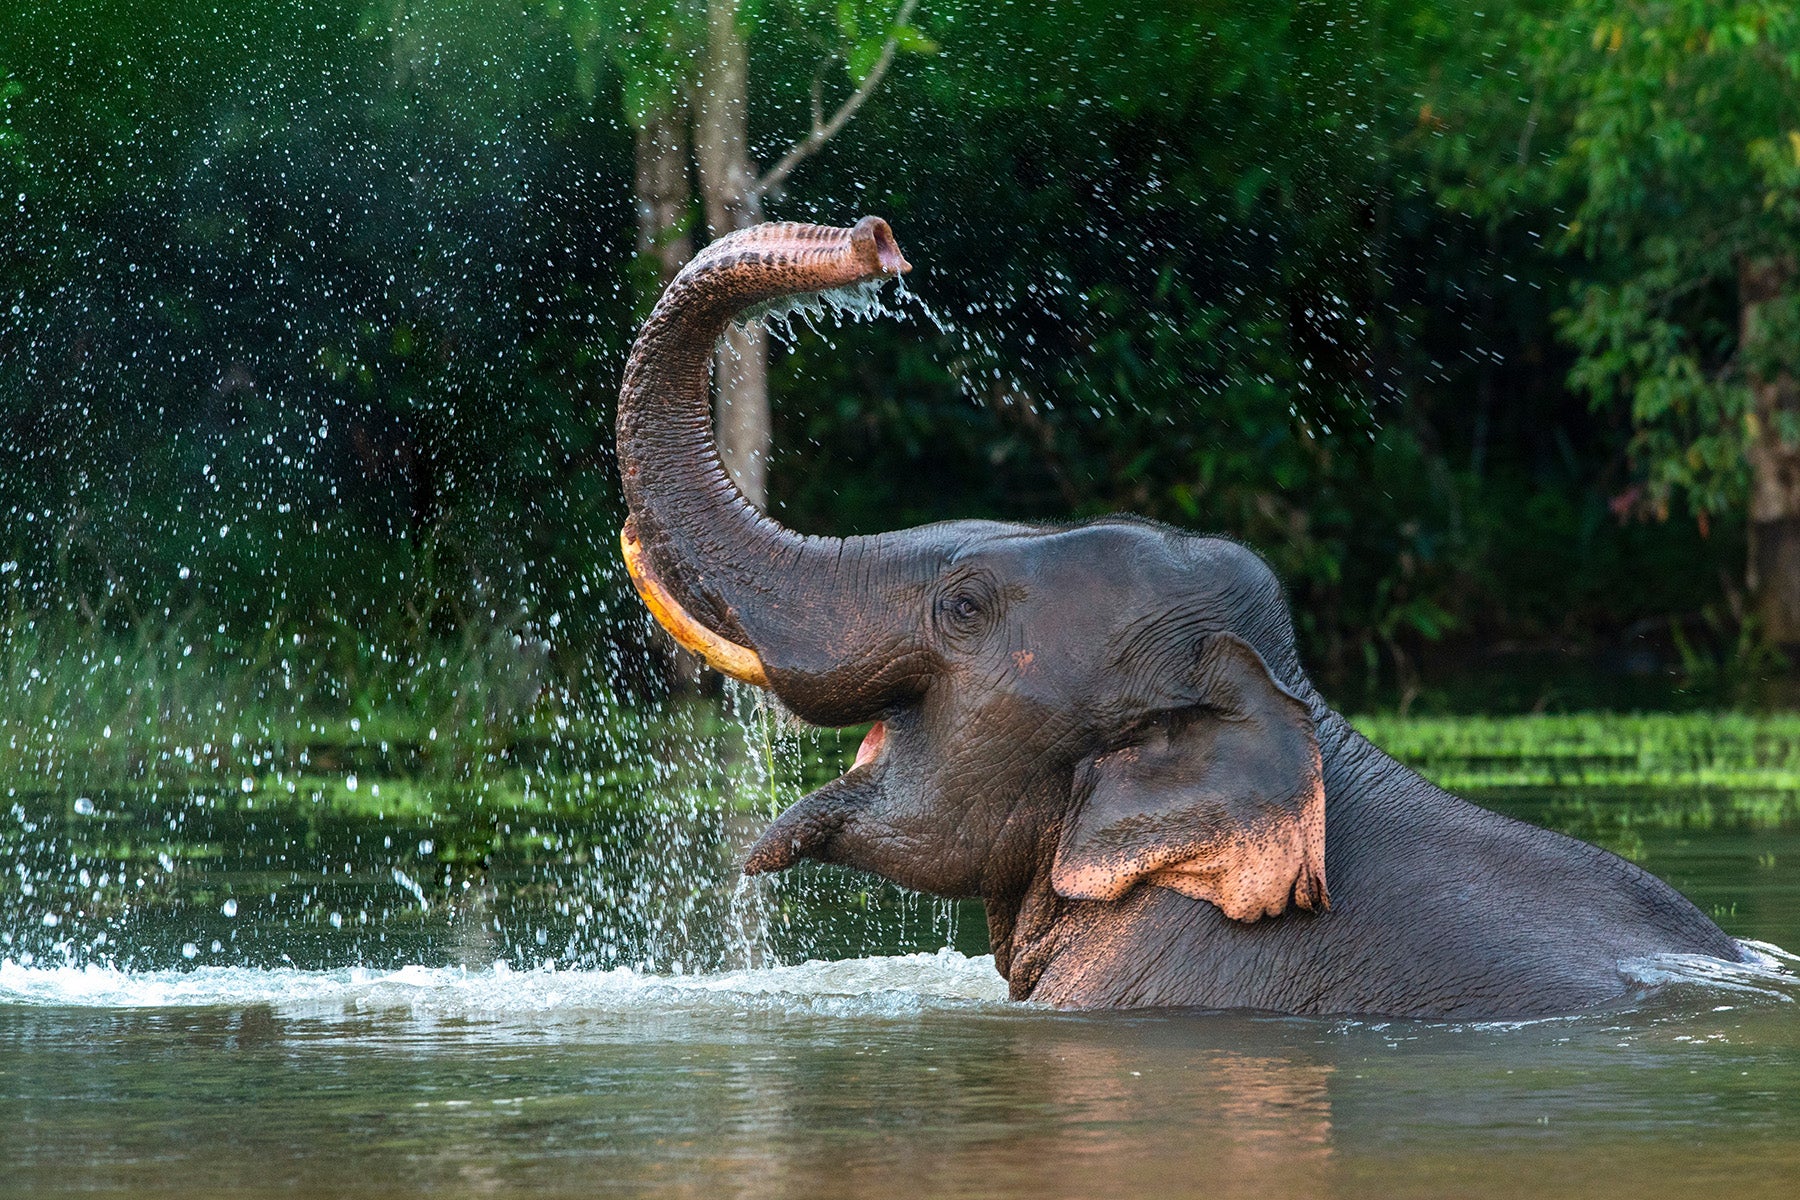 elephant playing in water